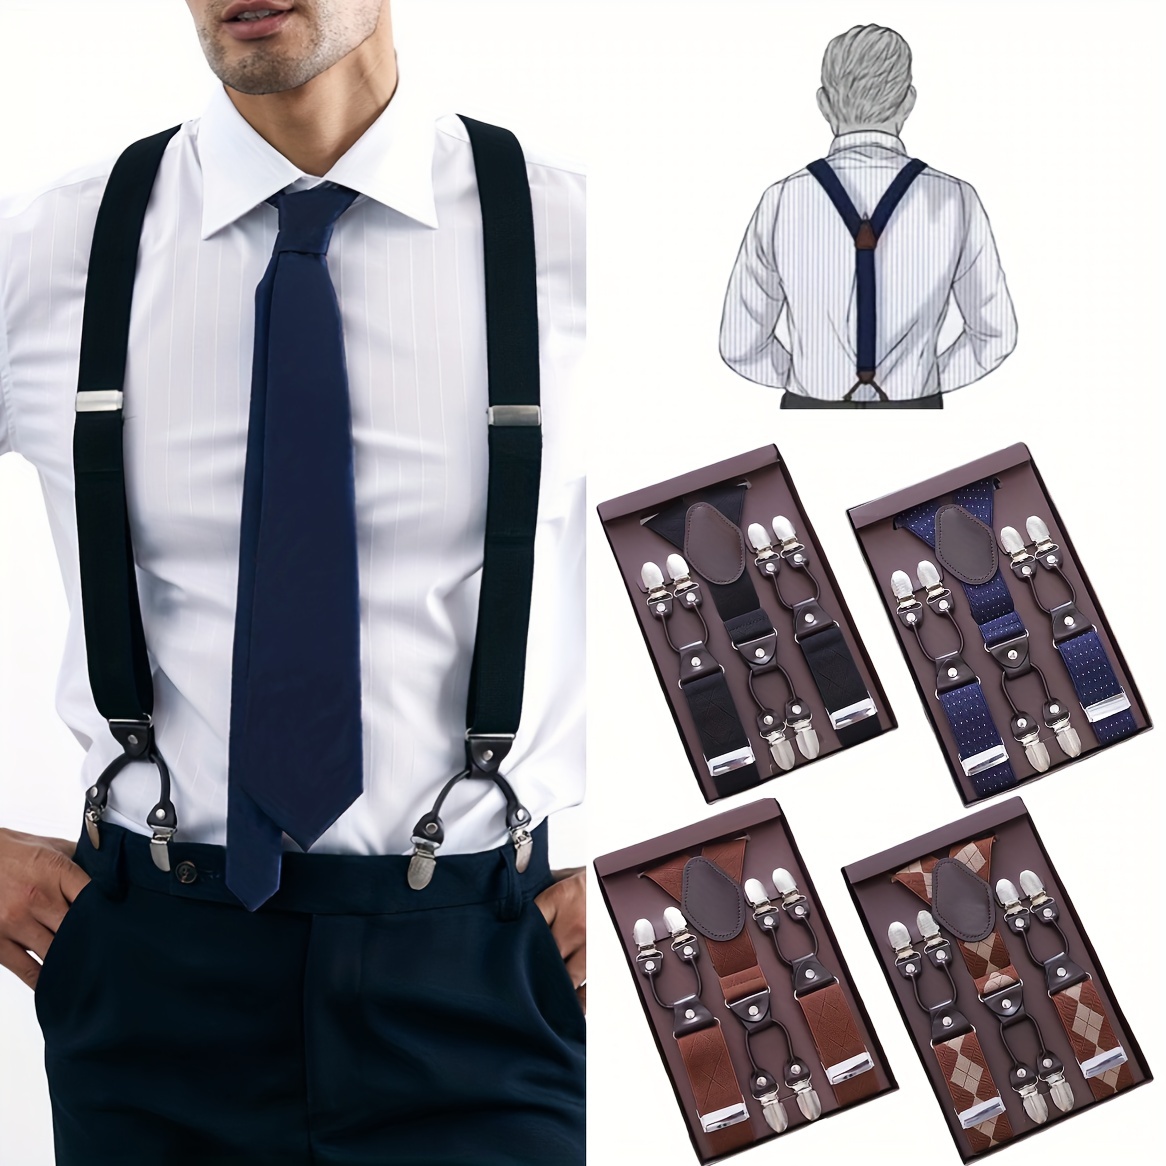 

Men's Suspenders With 6 Metal Protection Clips Elastic Adjustable Y-back Clip-on Suspenders Trouser Braces Strap Belt, Ideal Choice For Gifts